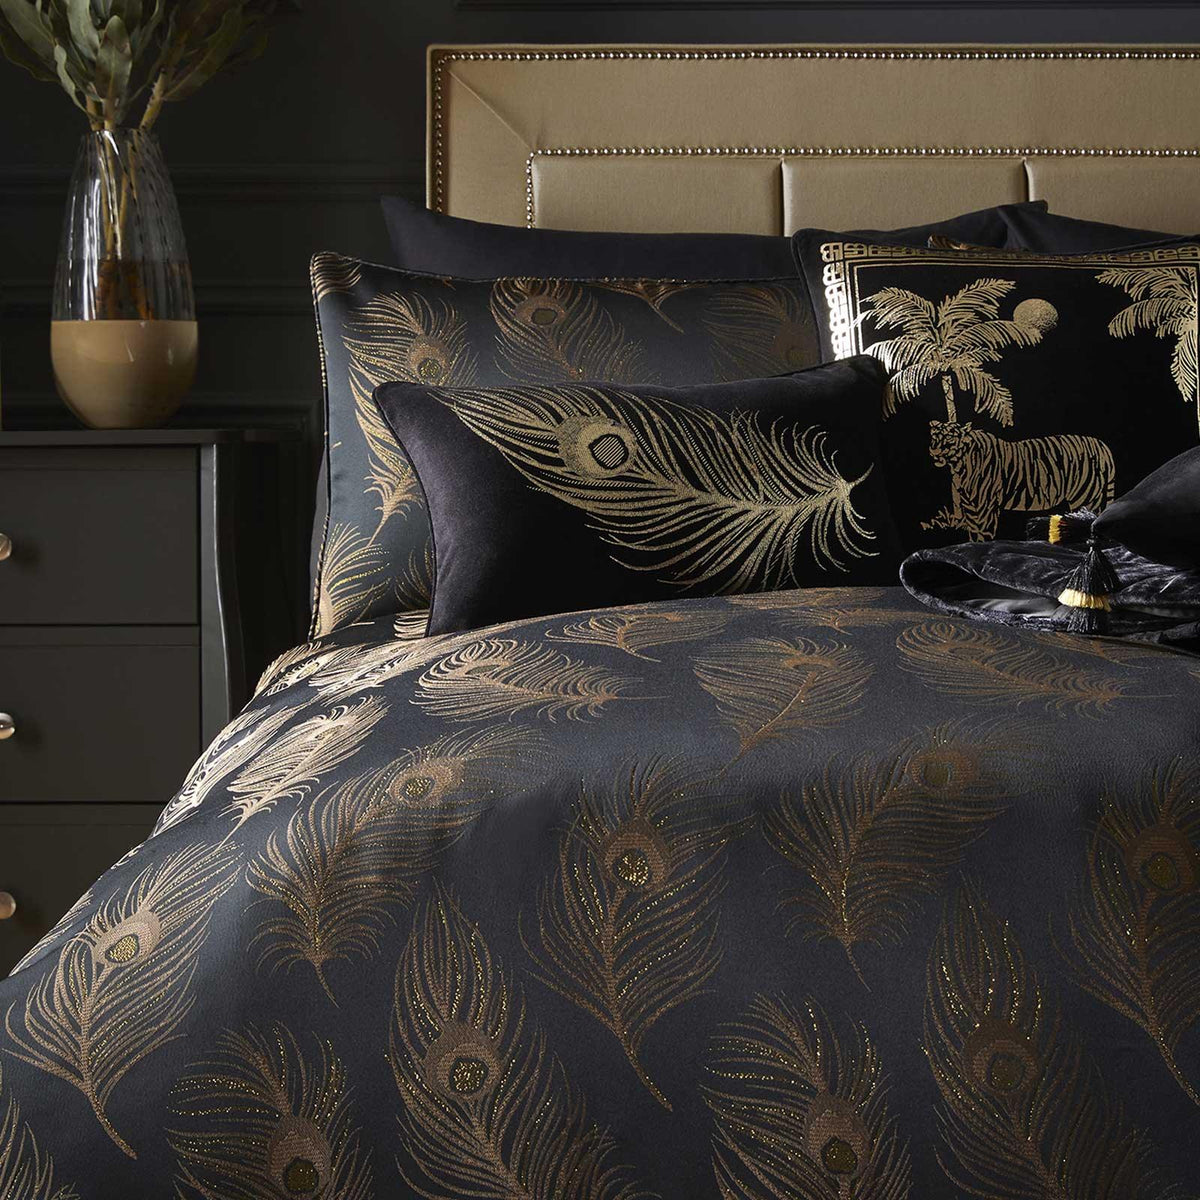 Dandy Feather Jacquard Black & Gold Duvet Cover Set Collection – Ideal